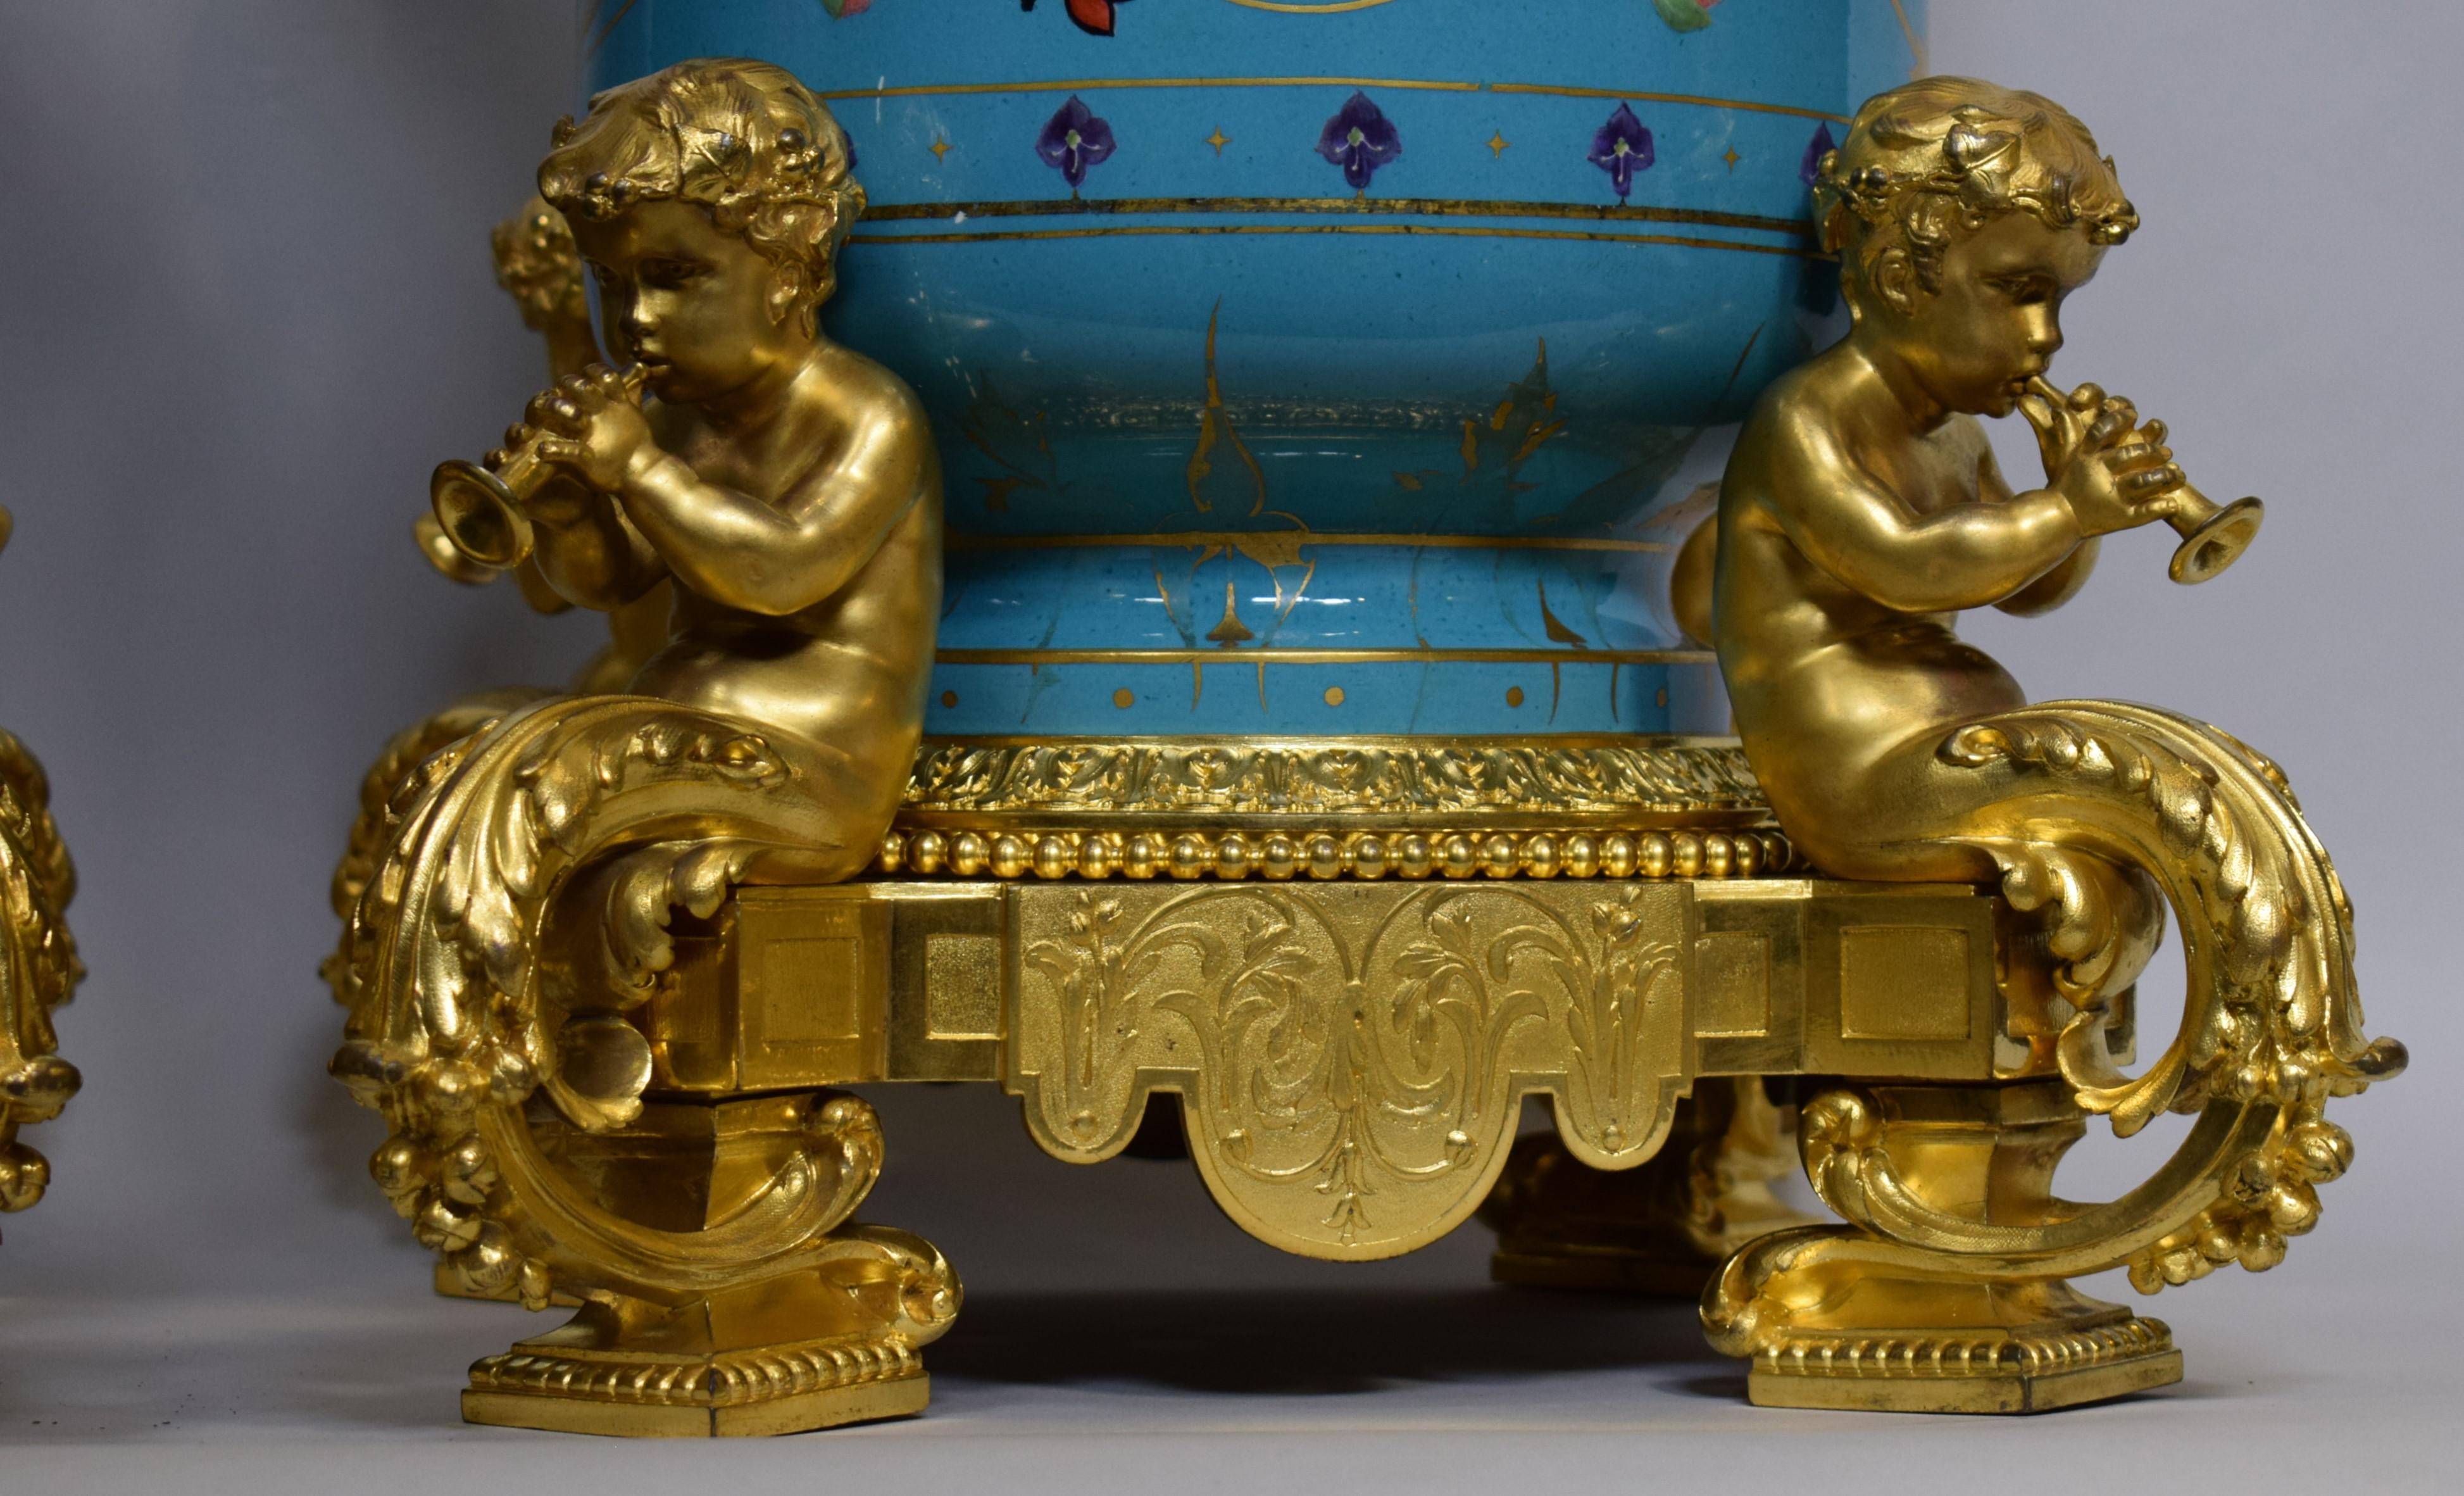 French “Manufacture de Porcelain de Sevres” and Victor Paillard (French 1805-1886), mid to late 19th century. Pair of blue ground floral decorated porcelain urns, painted by Charles Barriat (French, b. 1821). Both pieces having floral decorated gilt